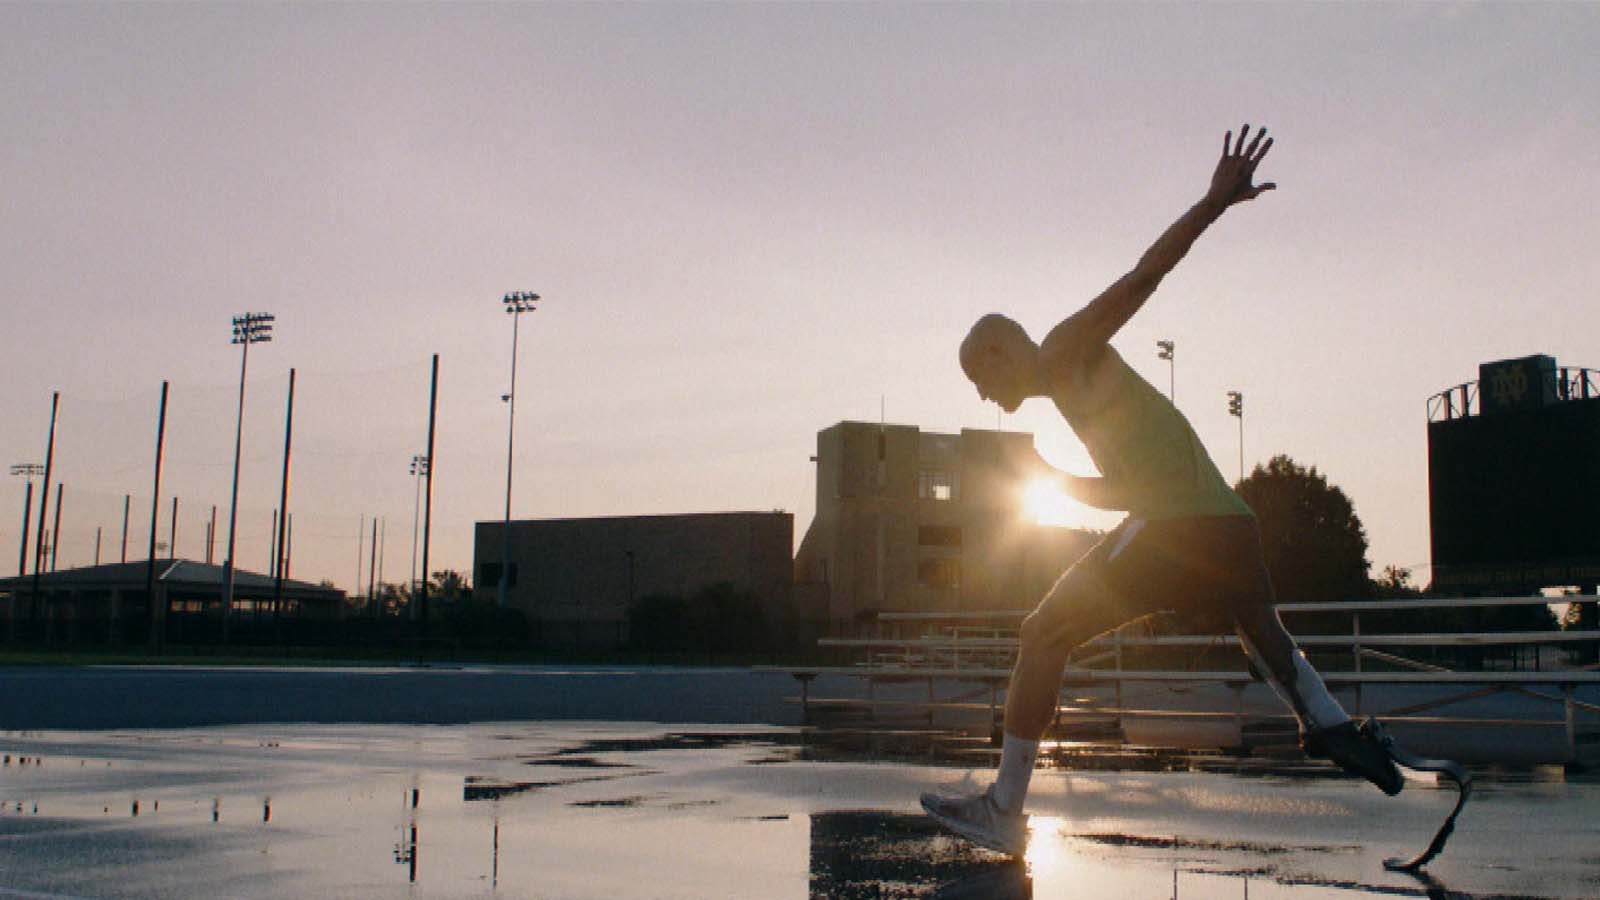 A man with a prosthetic leg preps to do a high jump on a track at sunset.